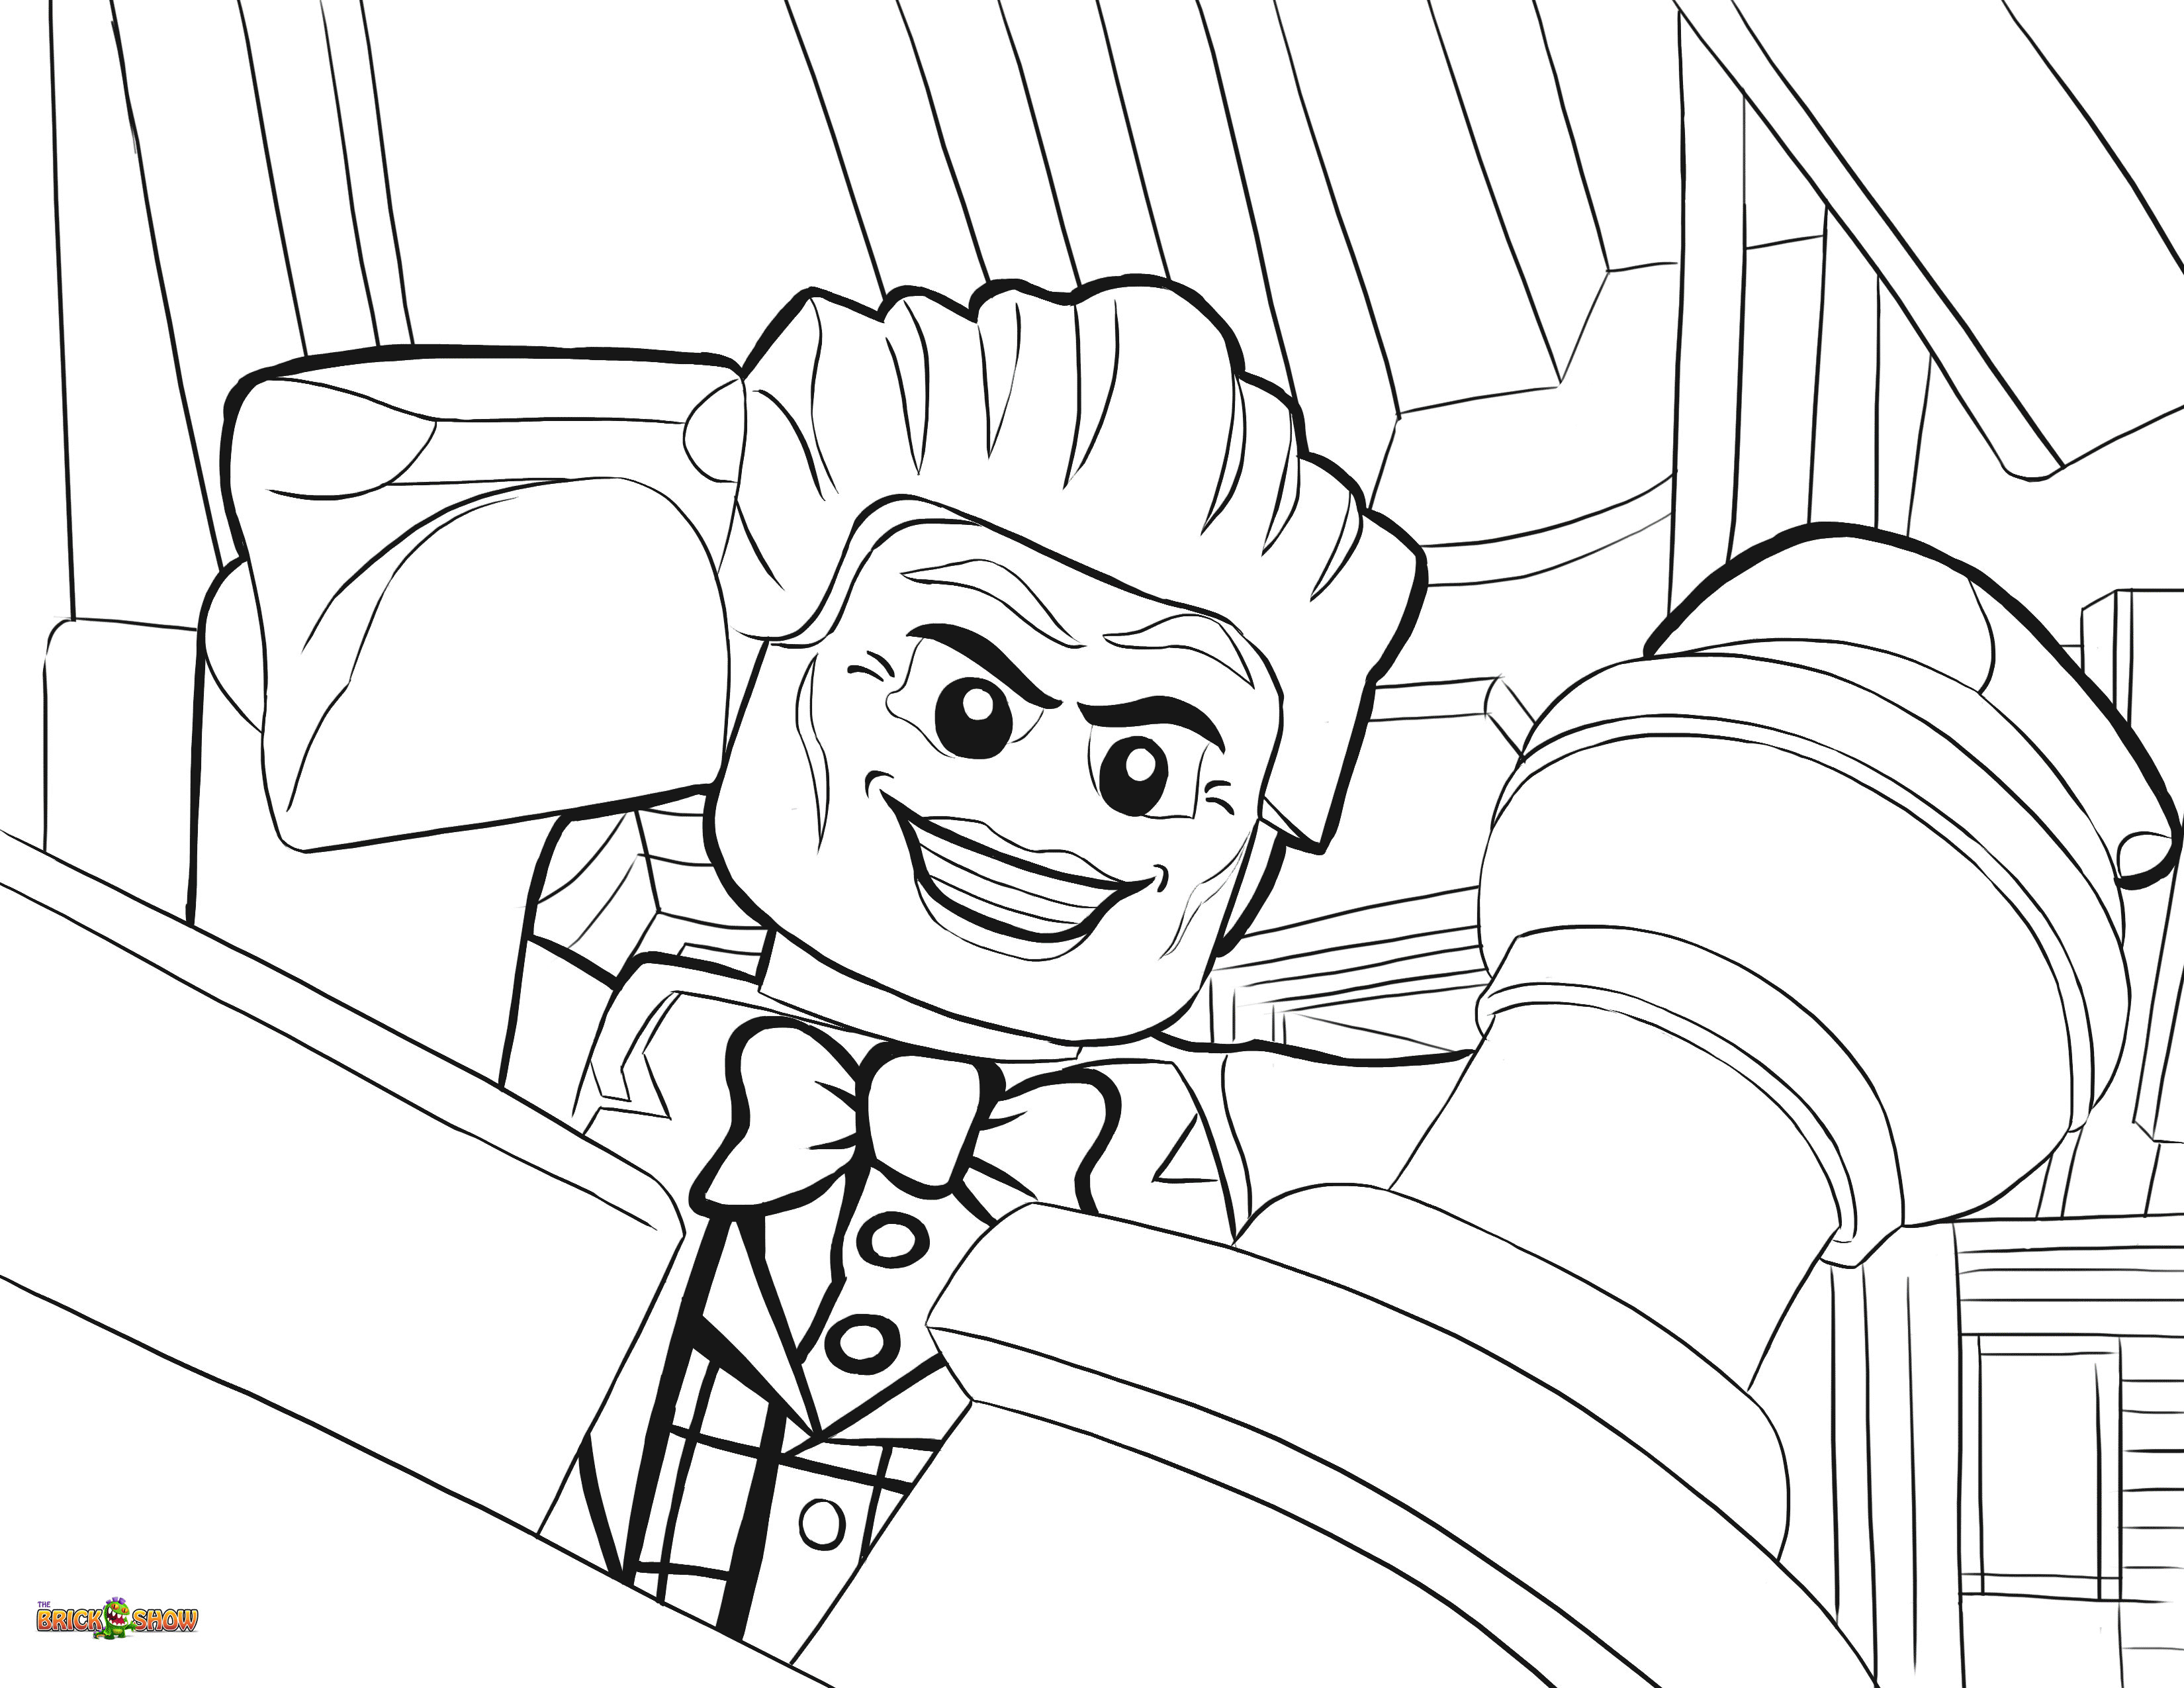 Lego Super Heroes - Coloring Pages for Kids and for Adults